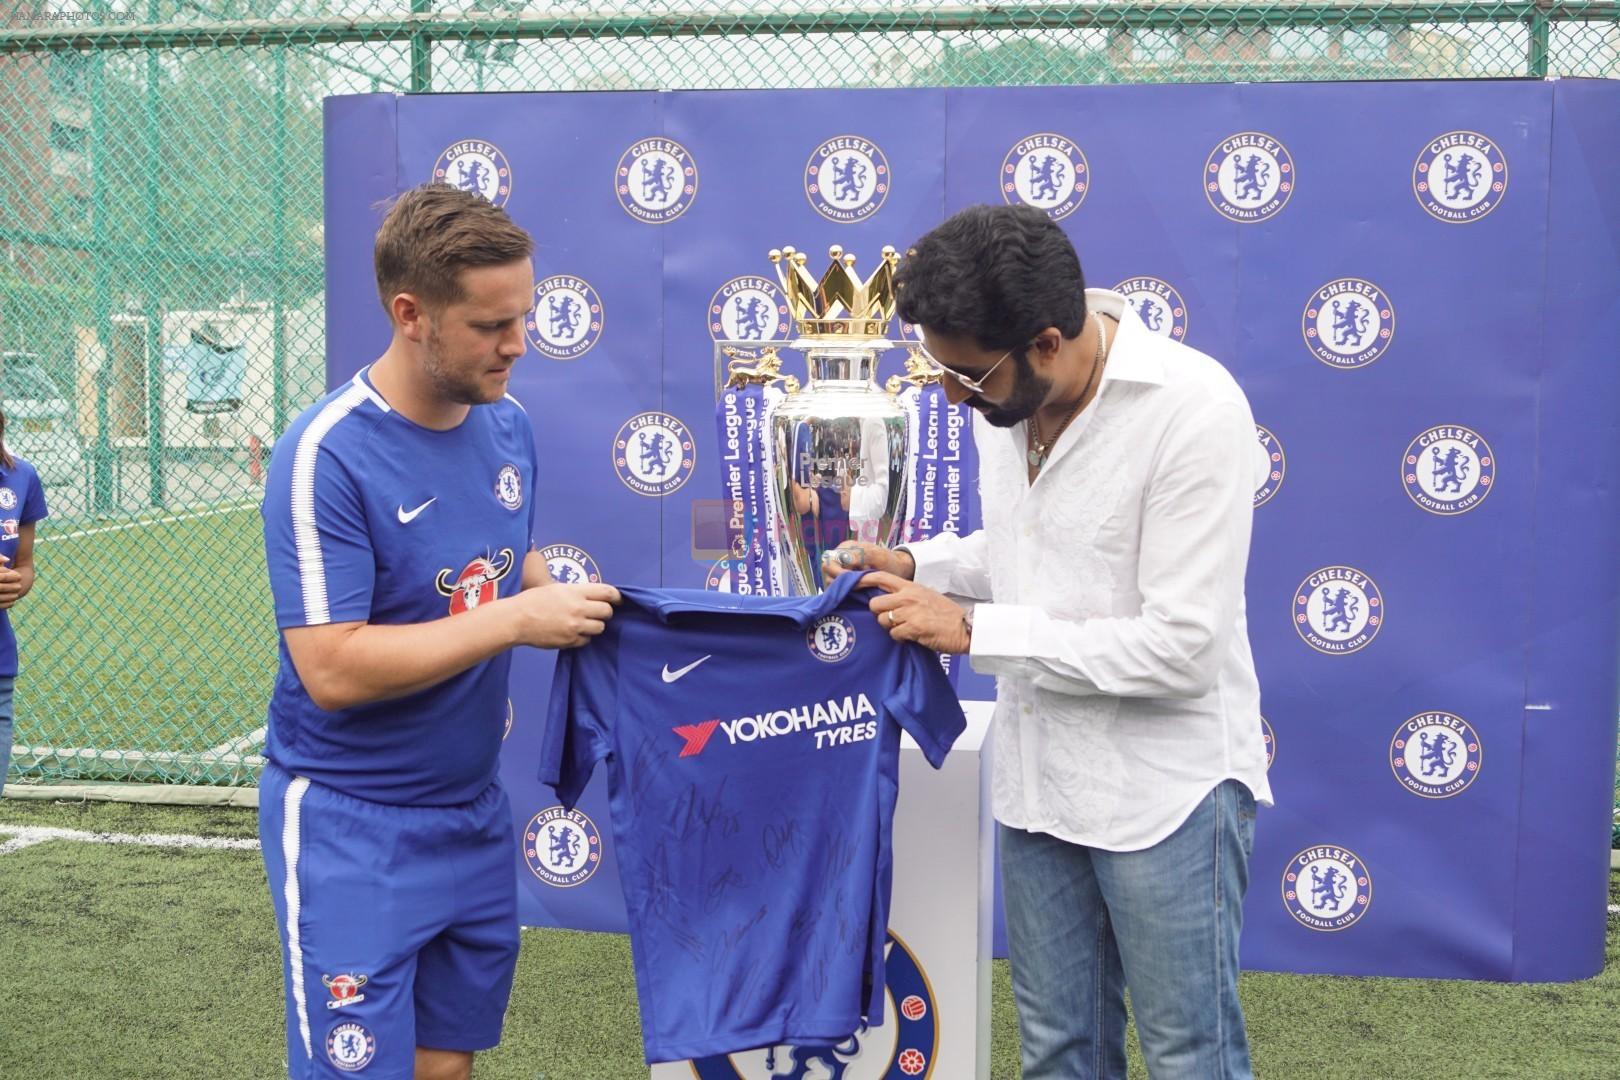 Abhishek Bachchan At Chelsea Football Club For Coach Education Session on 21st Oct 2017